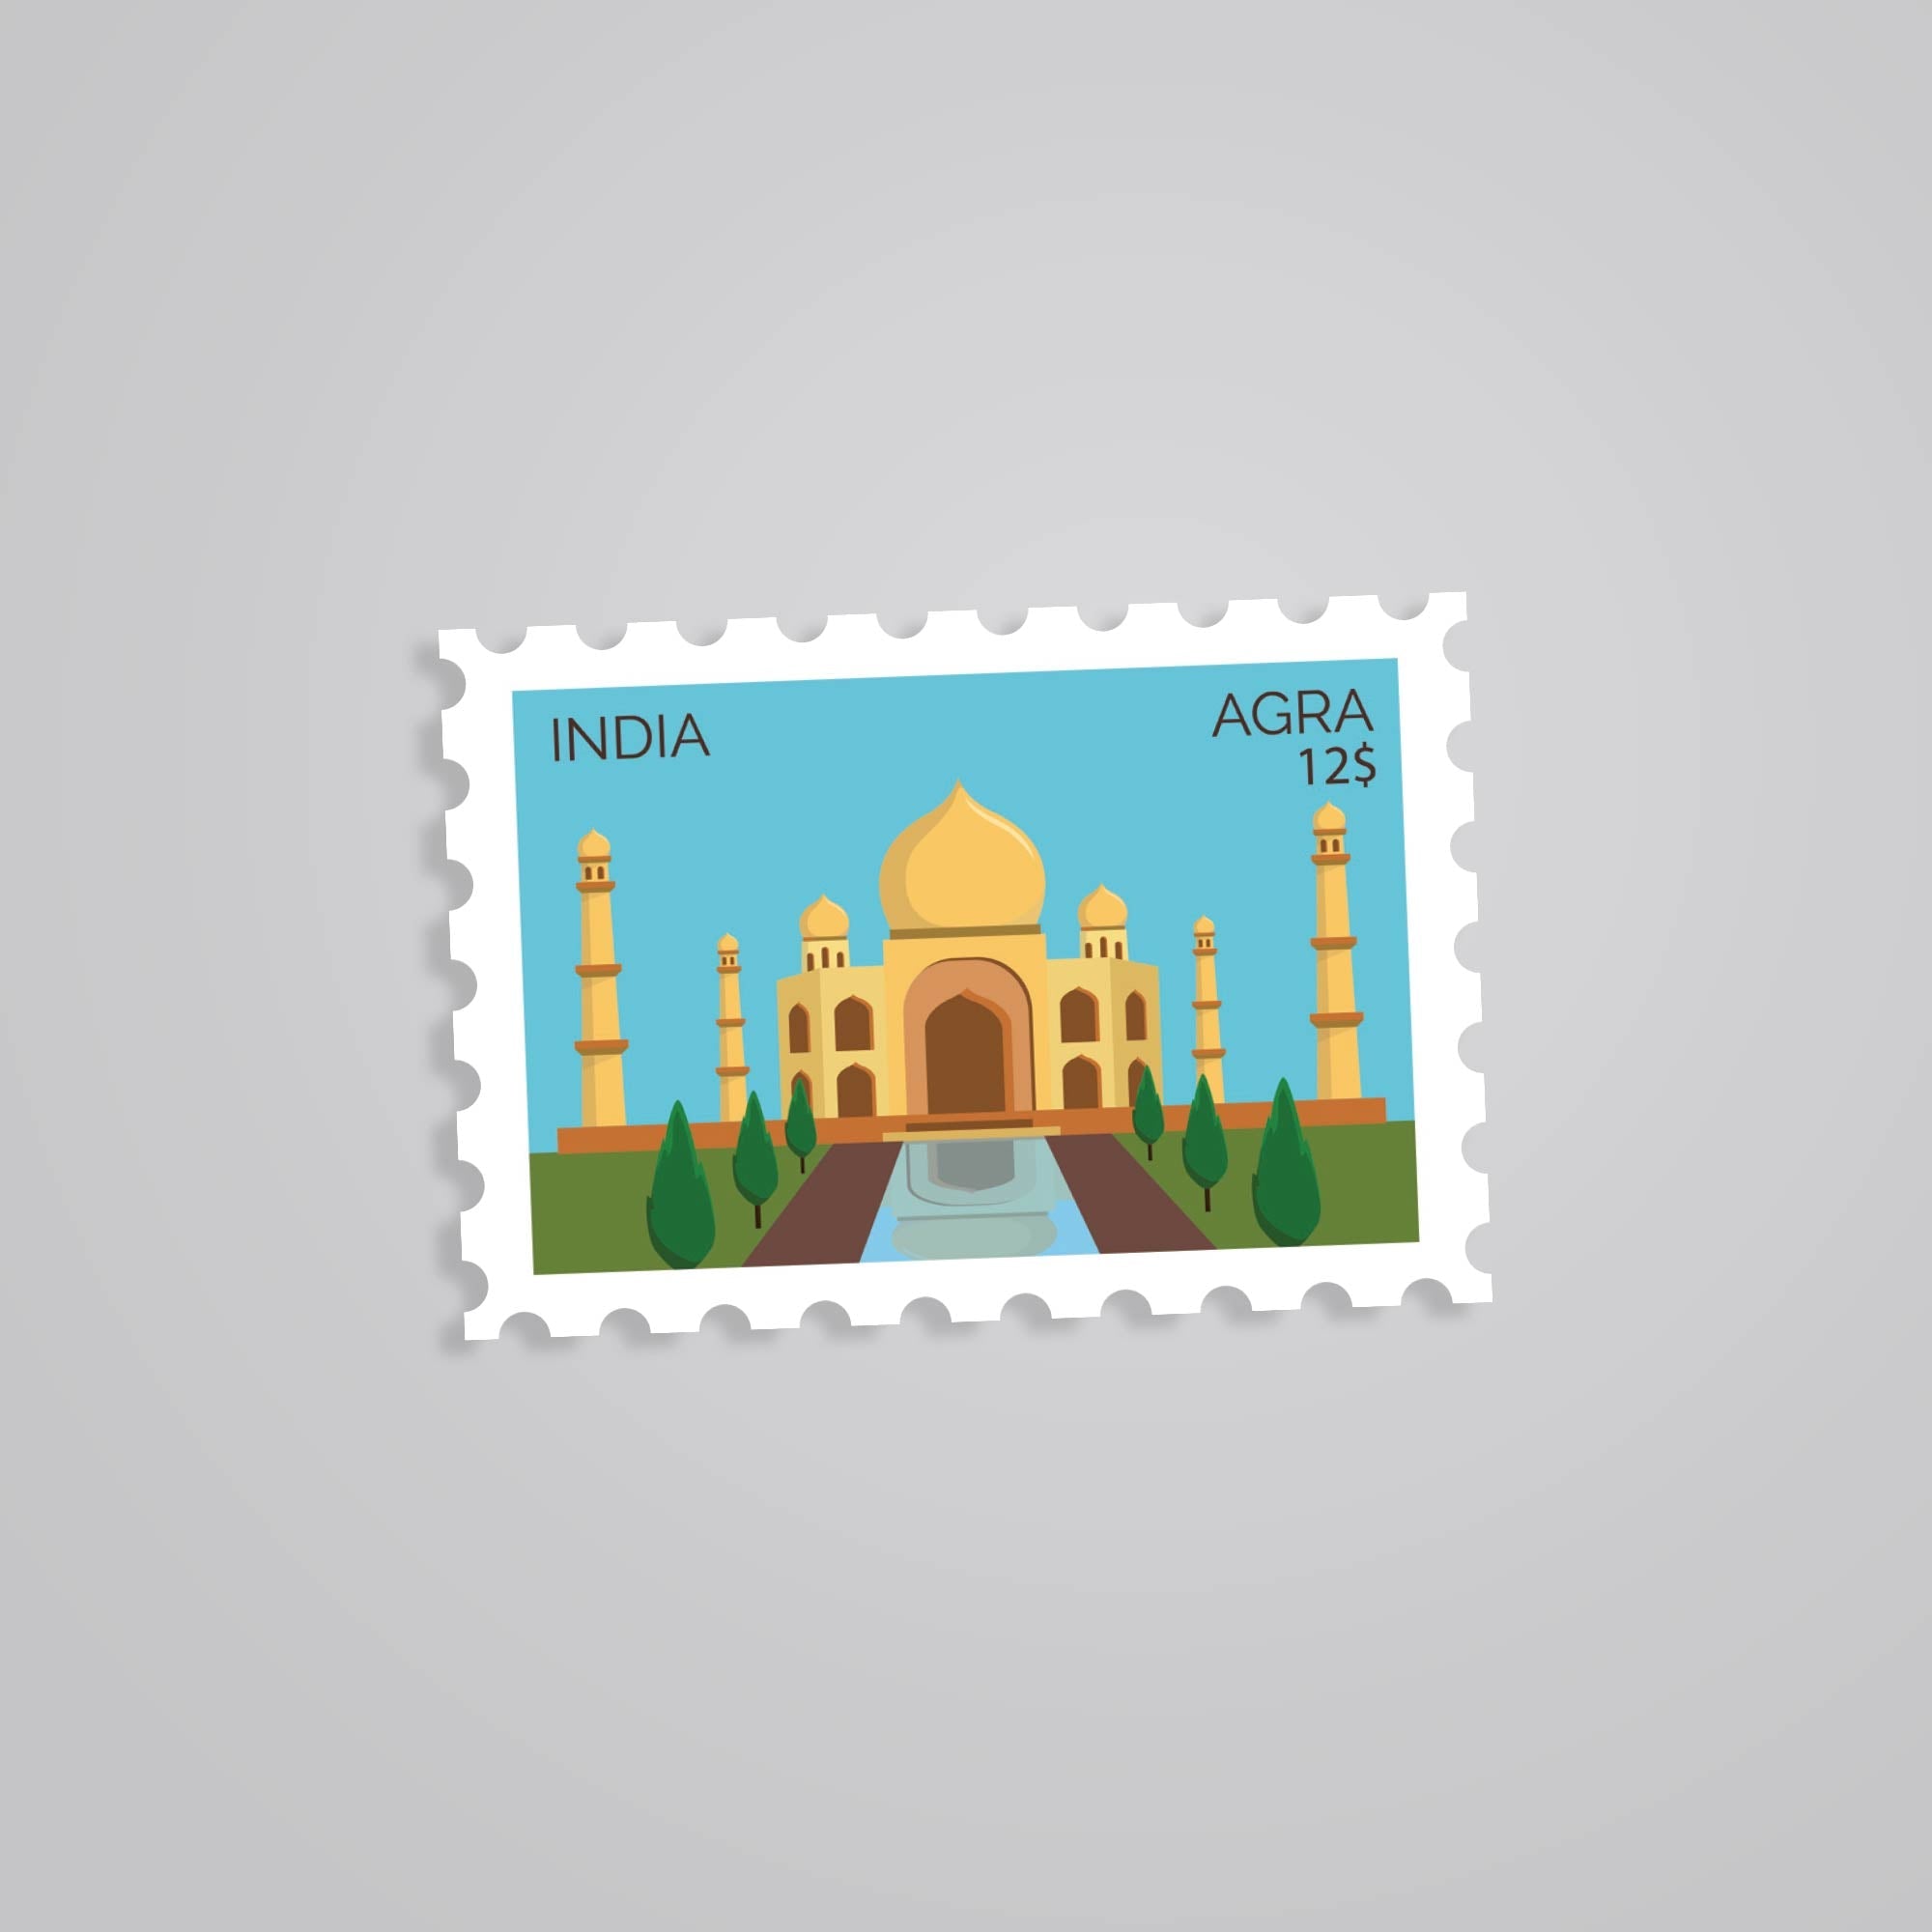 Fomo Store Stickers Travels India Agra Stamp